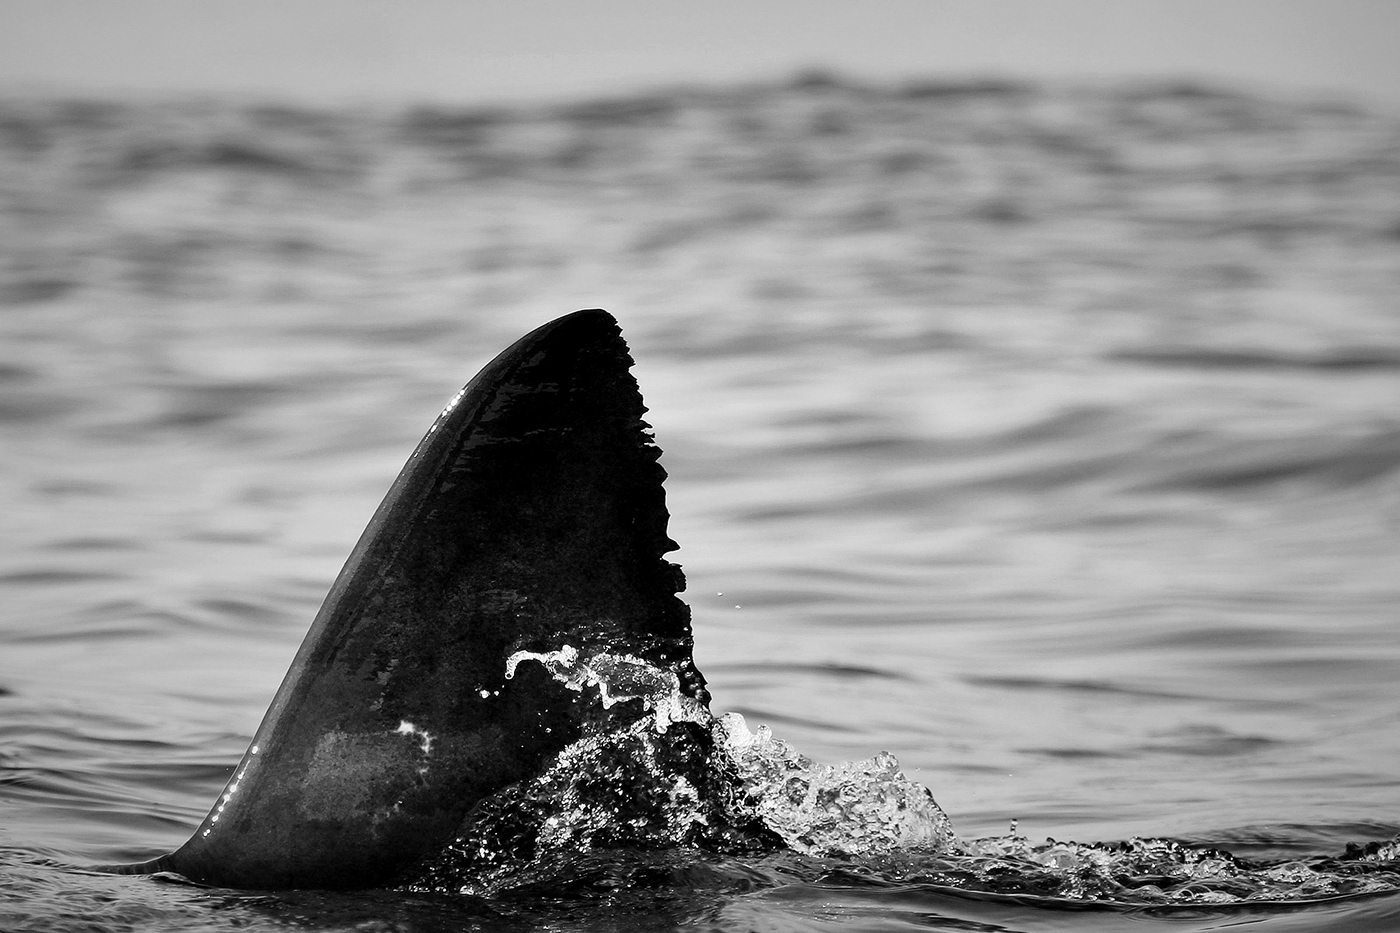 Carcharodon carcharias great white shark marine conservation sharks UNDERWATER PHOTOGRAPHY wildlife art wildlife conservation Wildlife photography